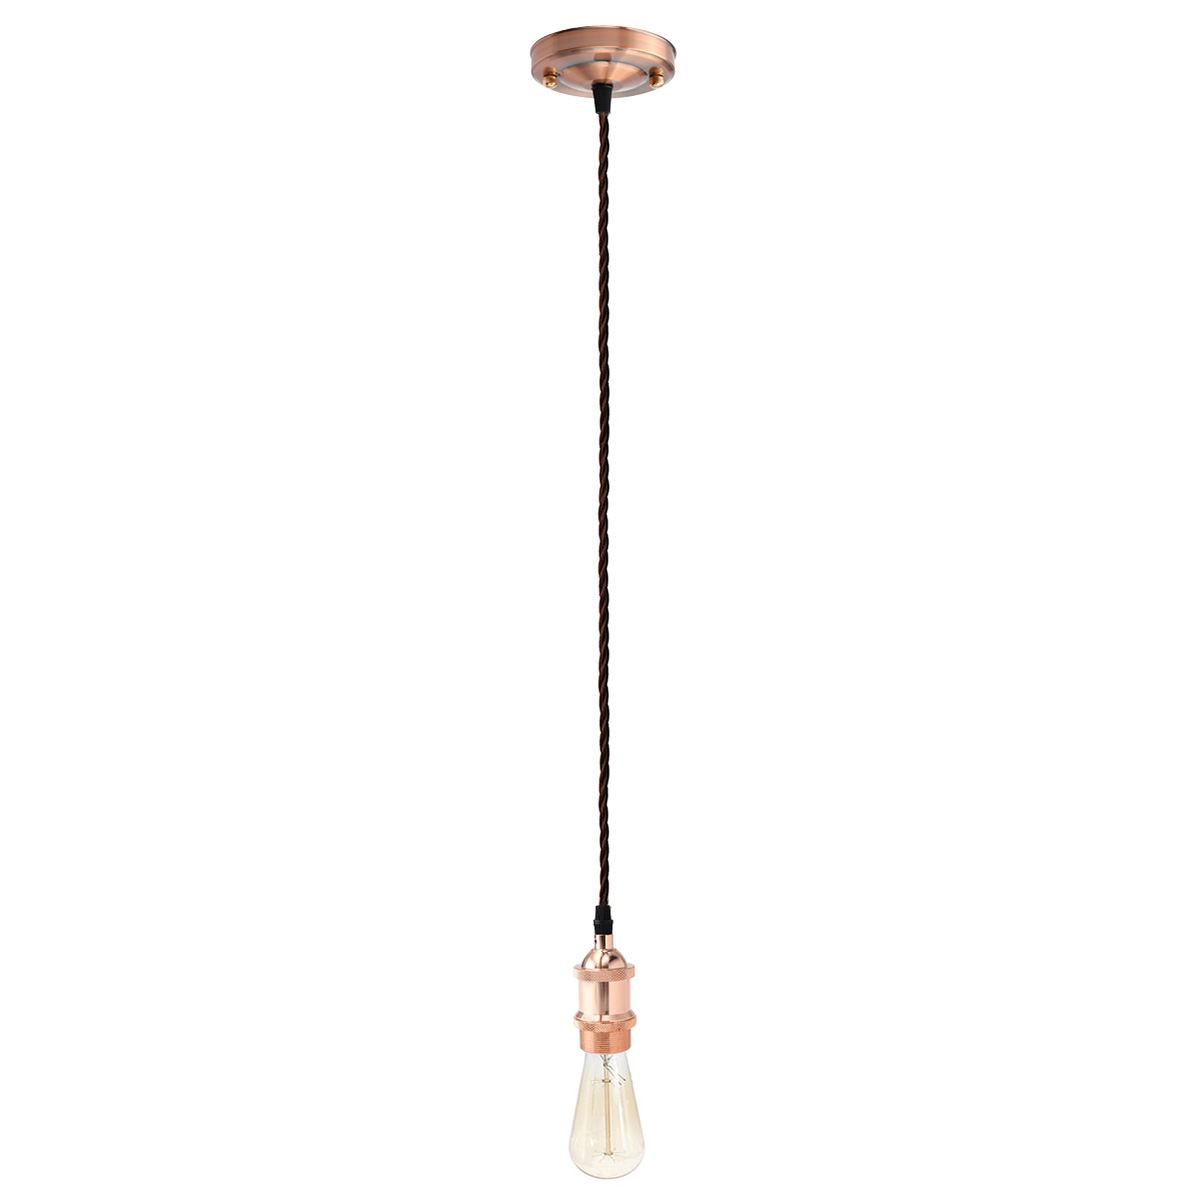 KINGSO-110V-220V-600W-Vintage-Lamp-Holder-Ceiling-Canopy-and-Copper-Socket-with-2M-Wire-1894180-12